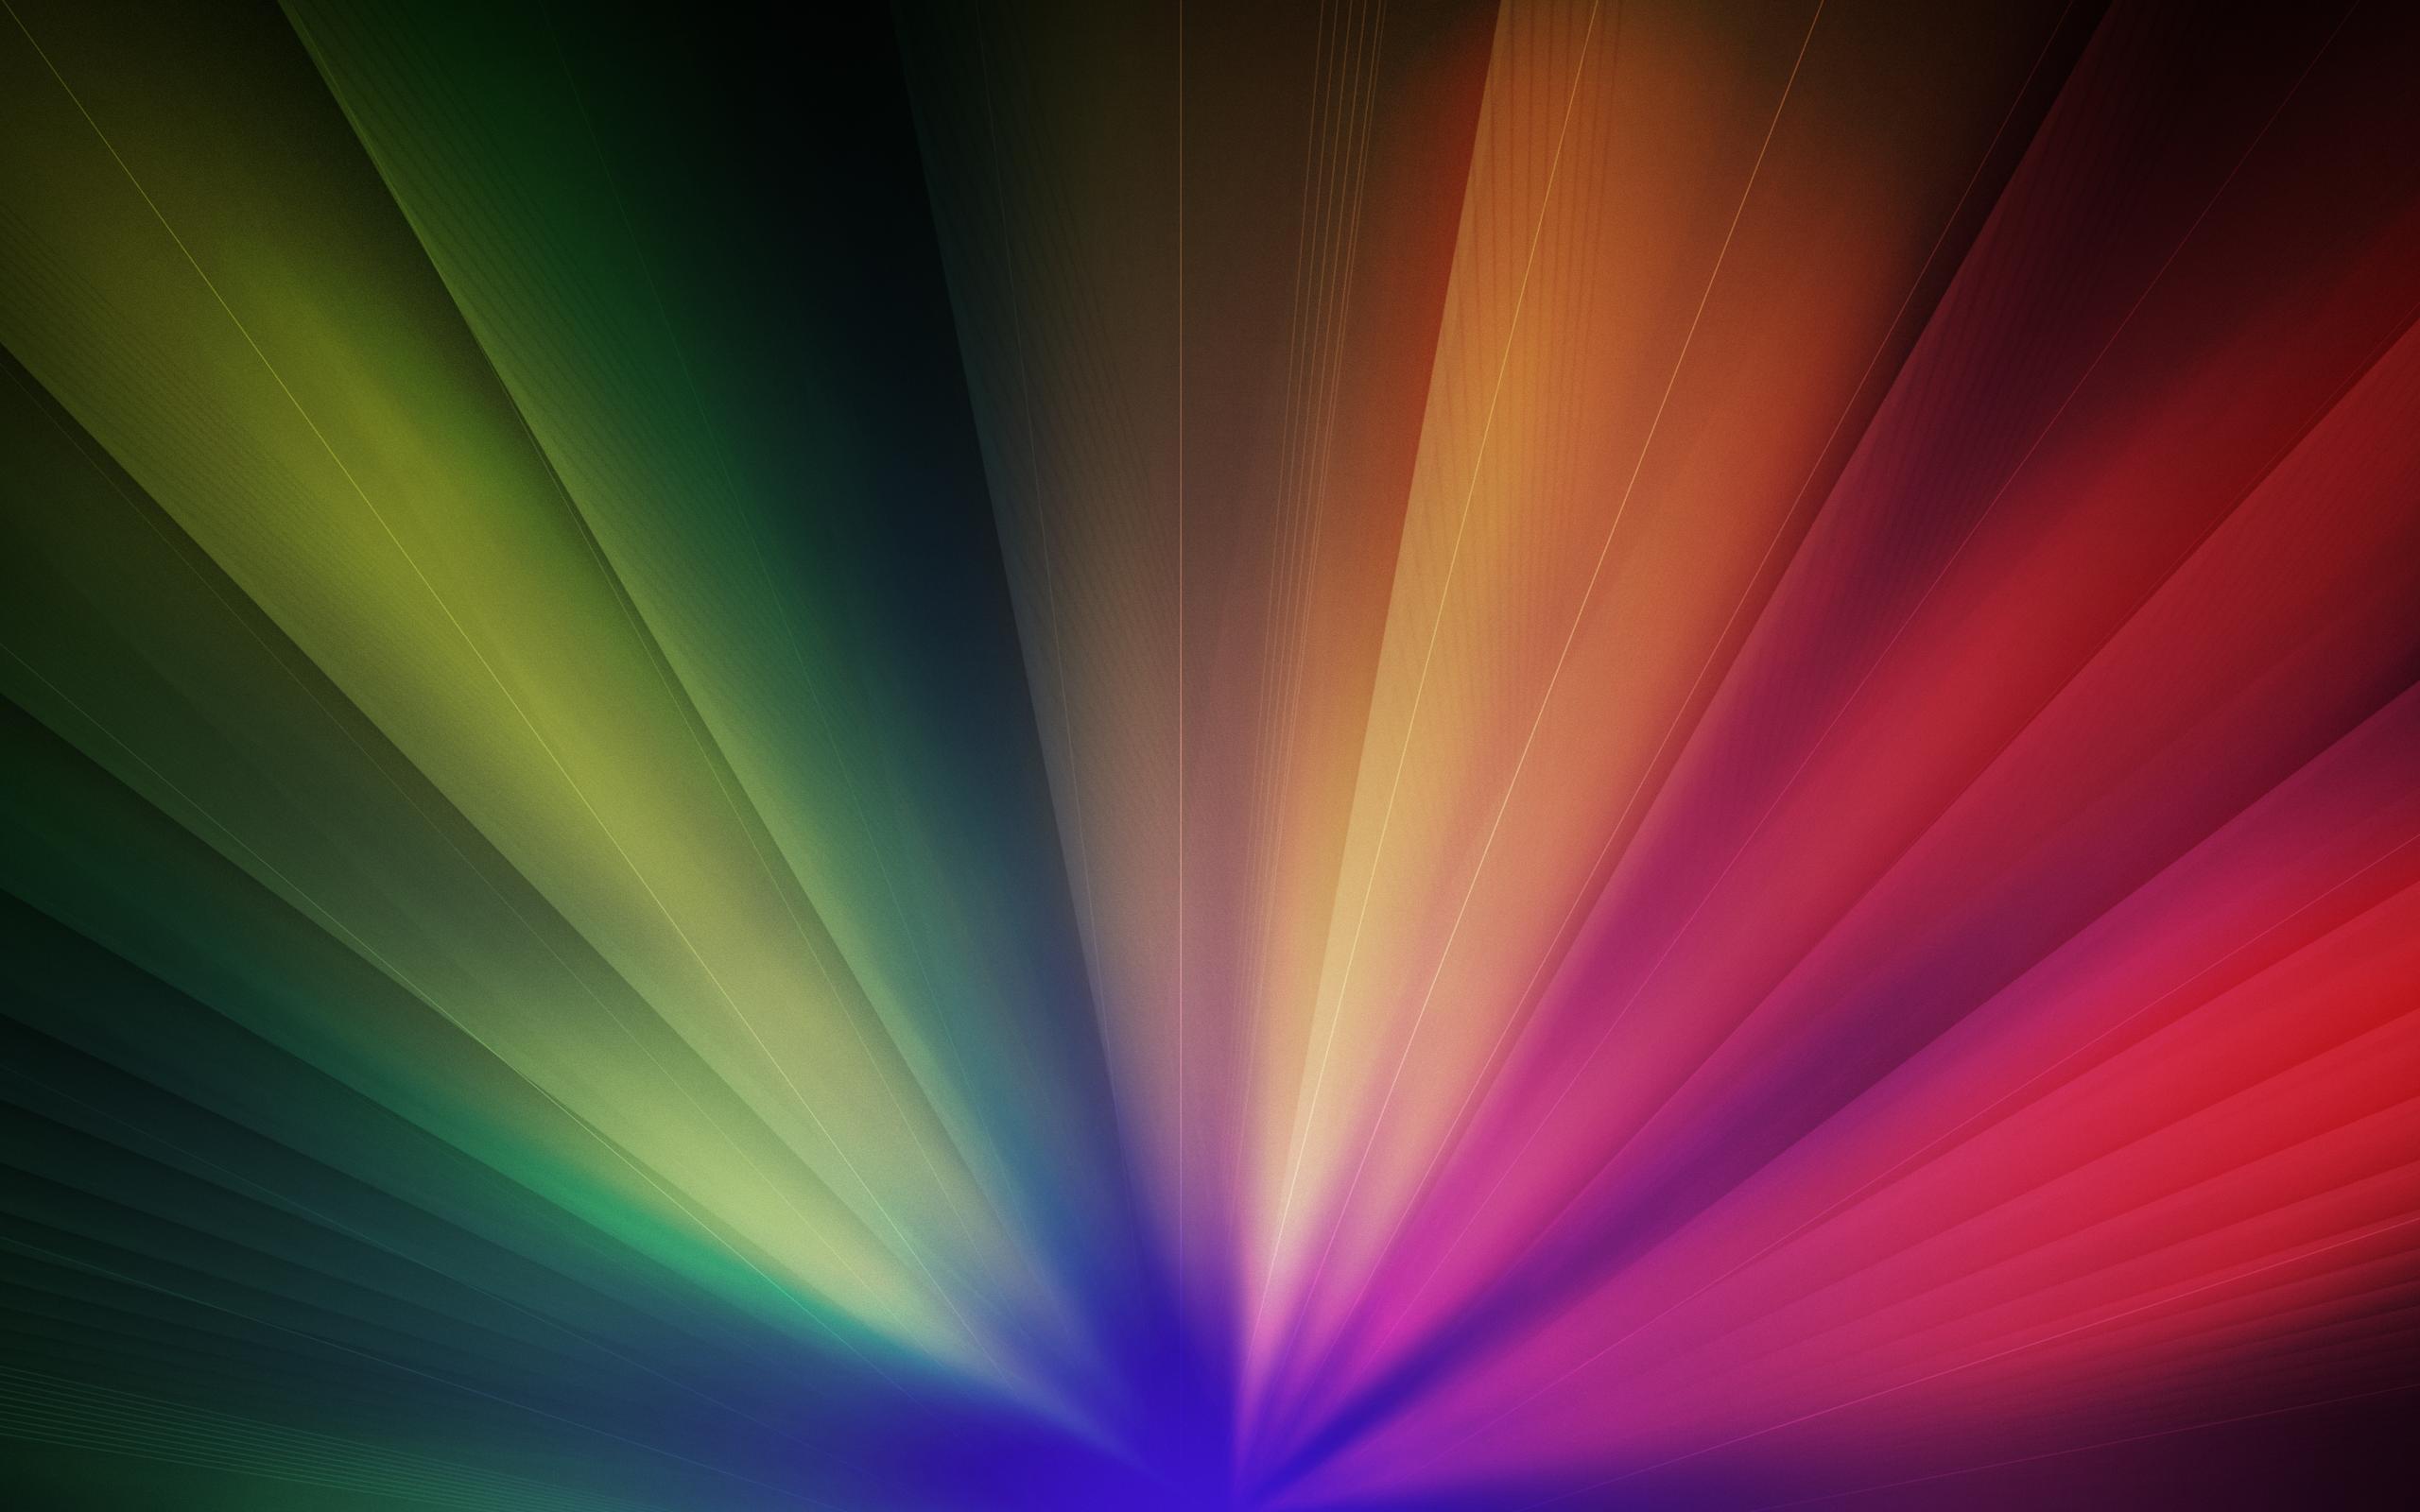 The Image of Abstract Multicolor 2560x1600 HD Wallpaper